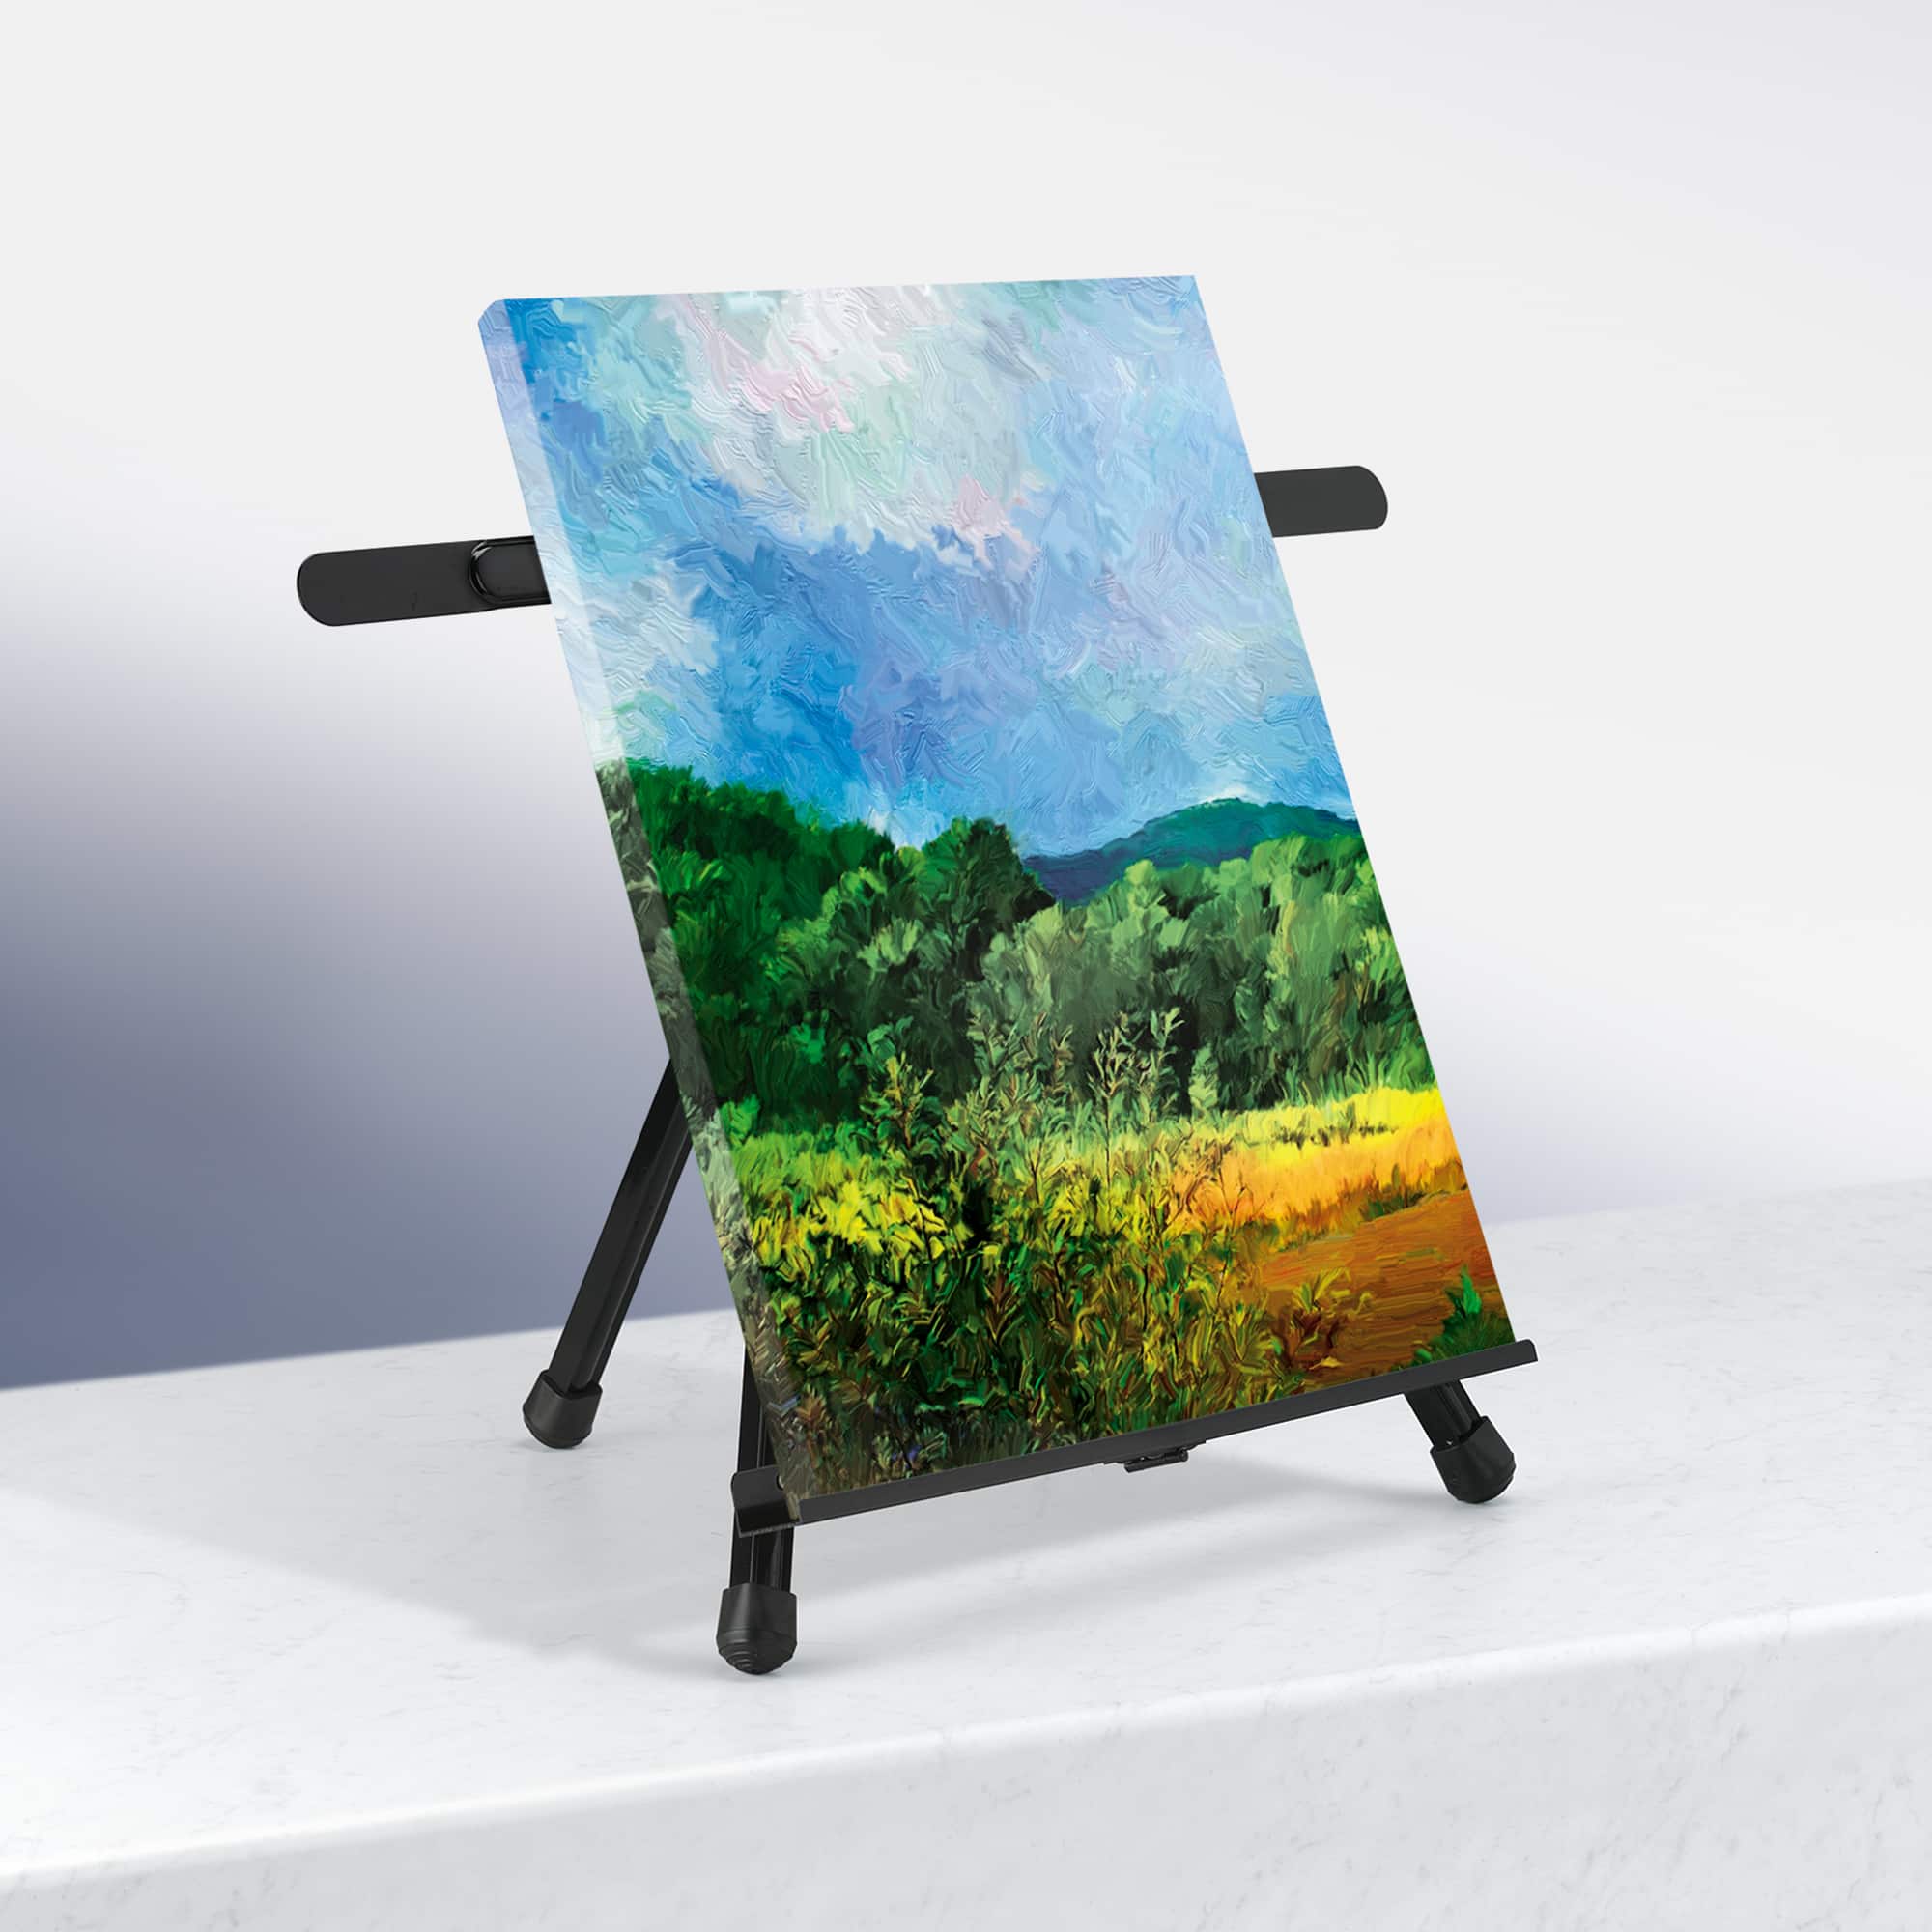 Compact Tabletop Easel by Artist&#x27;s Loft&#x2122;